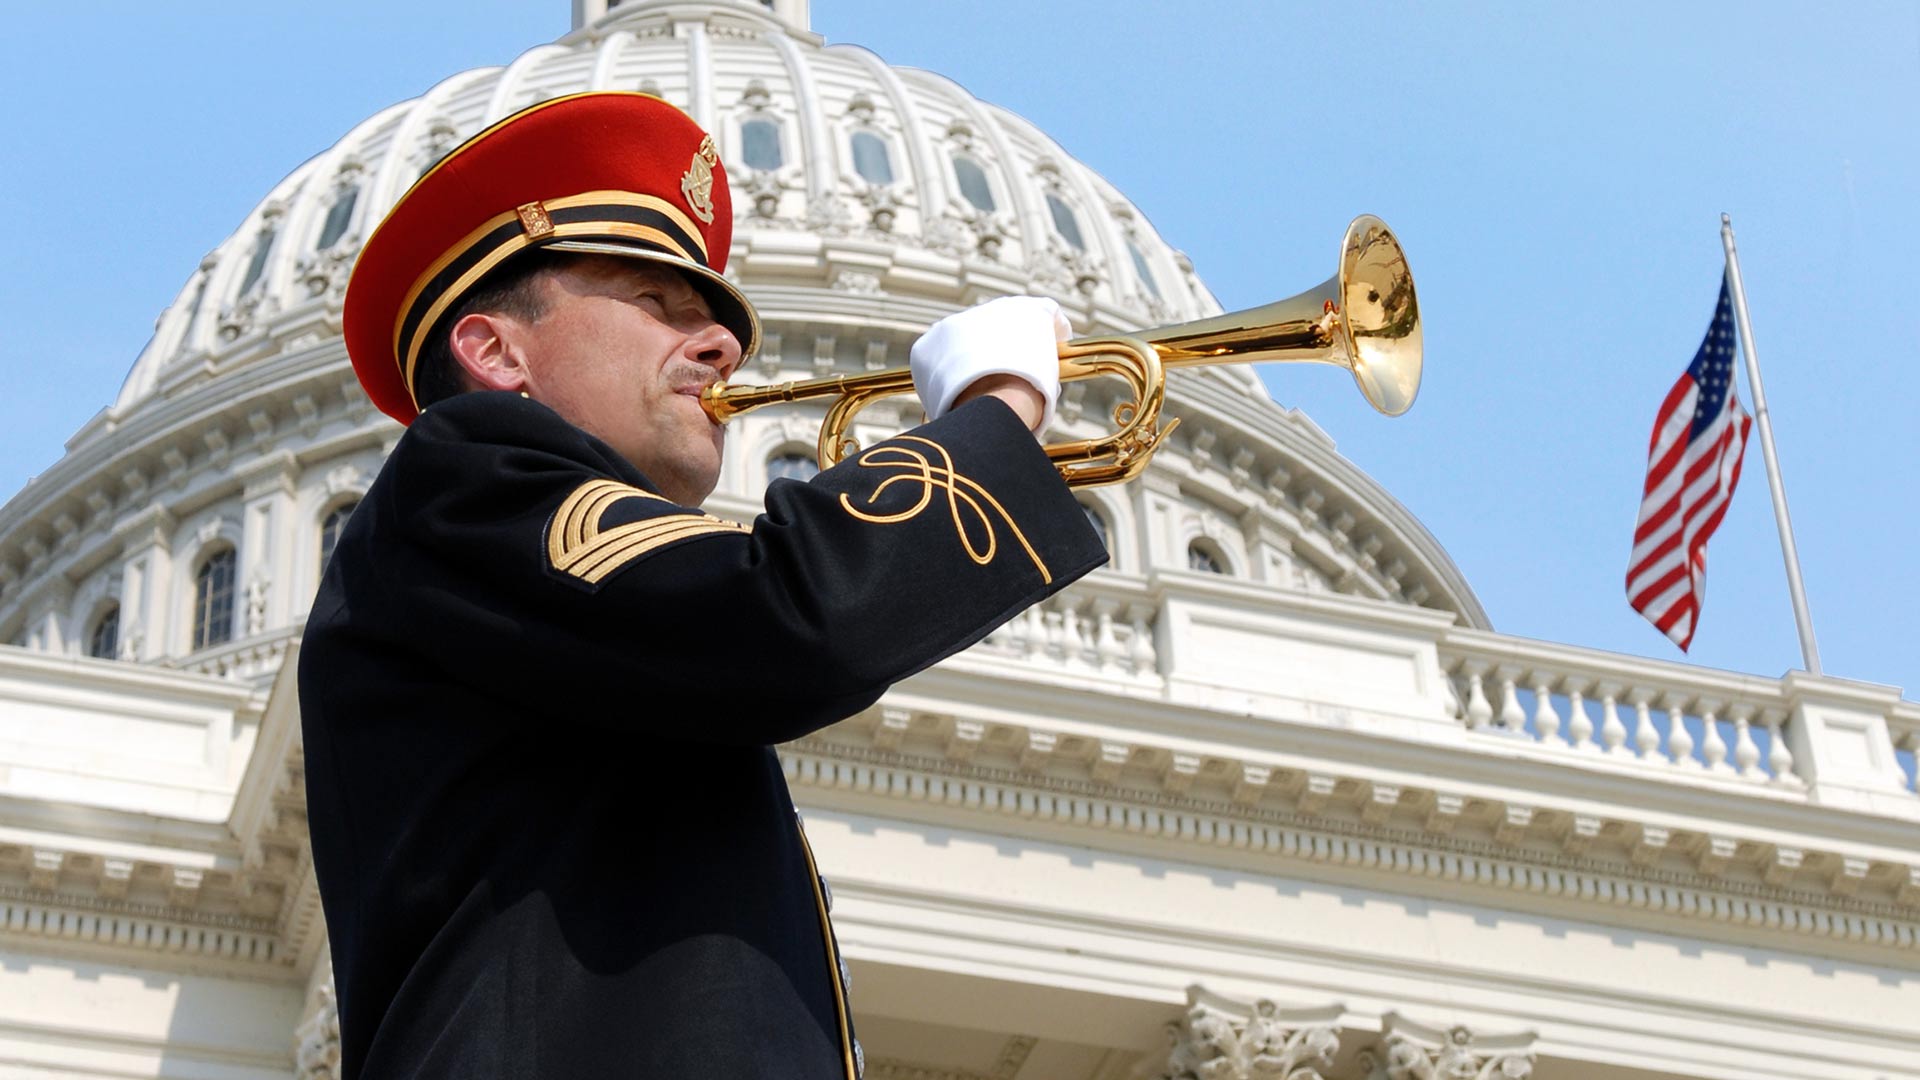 A bugler plays "Taps" in honor of our fallen heroes during the NATIONAL MEMORIAL DAY CONCERT, broadcast live from the U.S. Capitol.